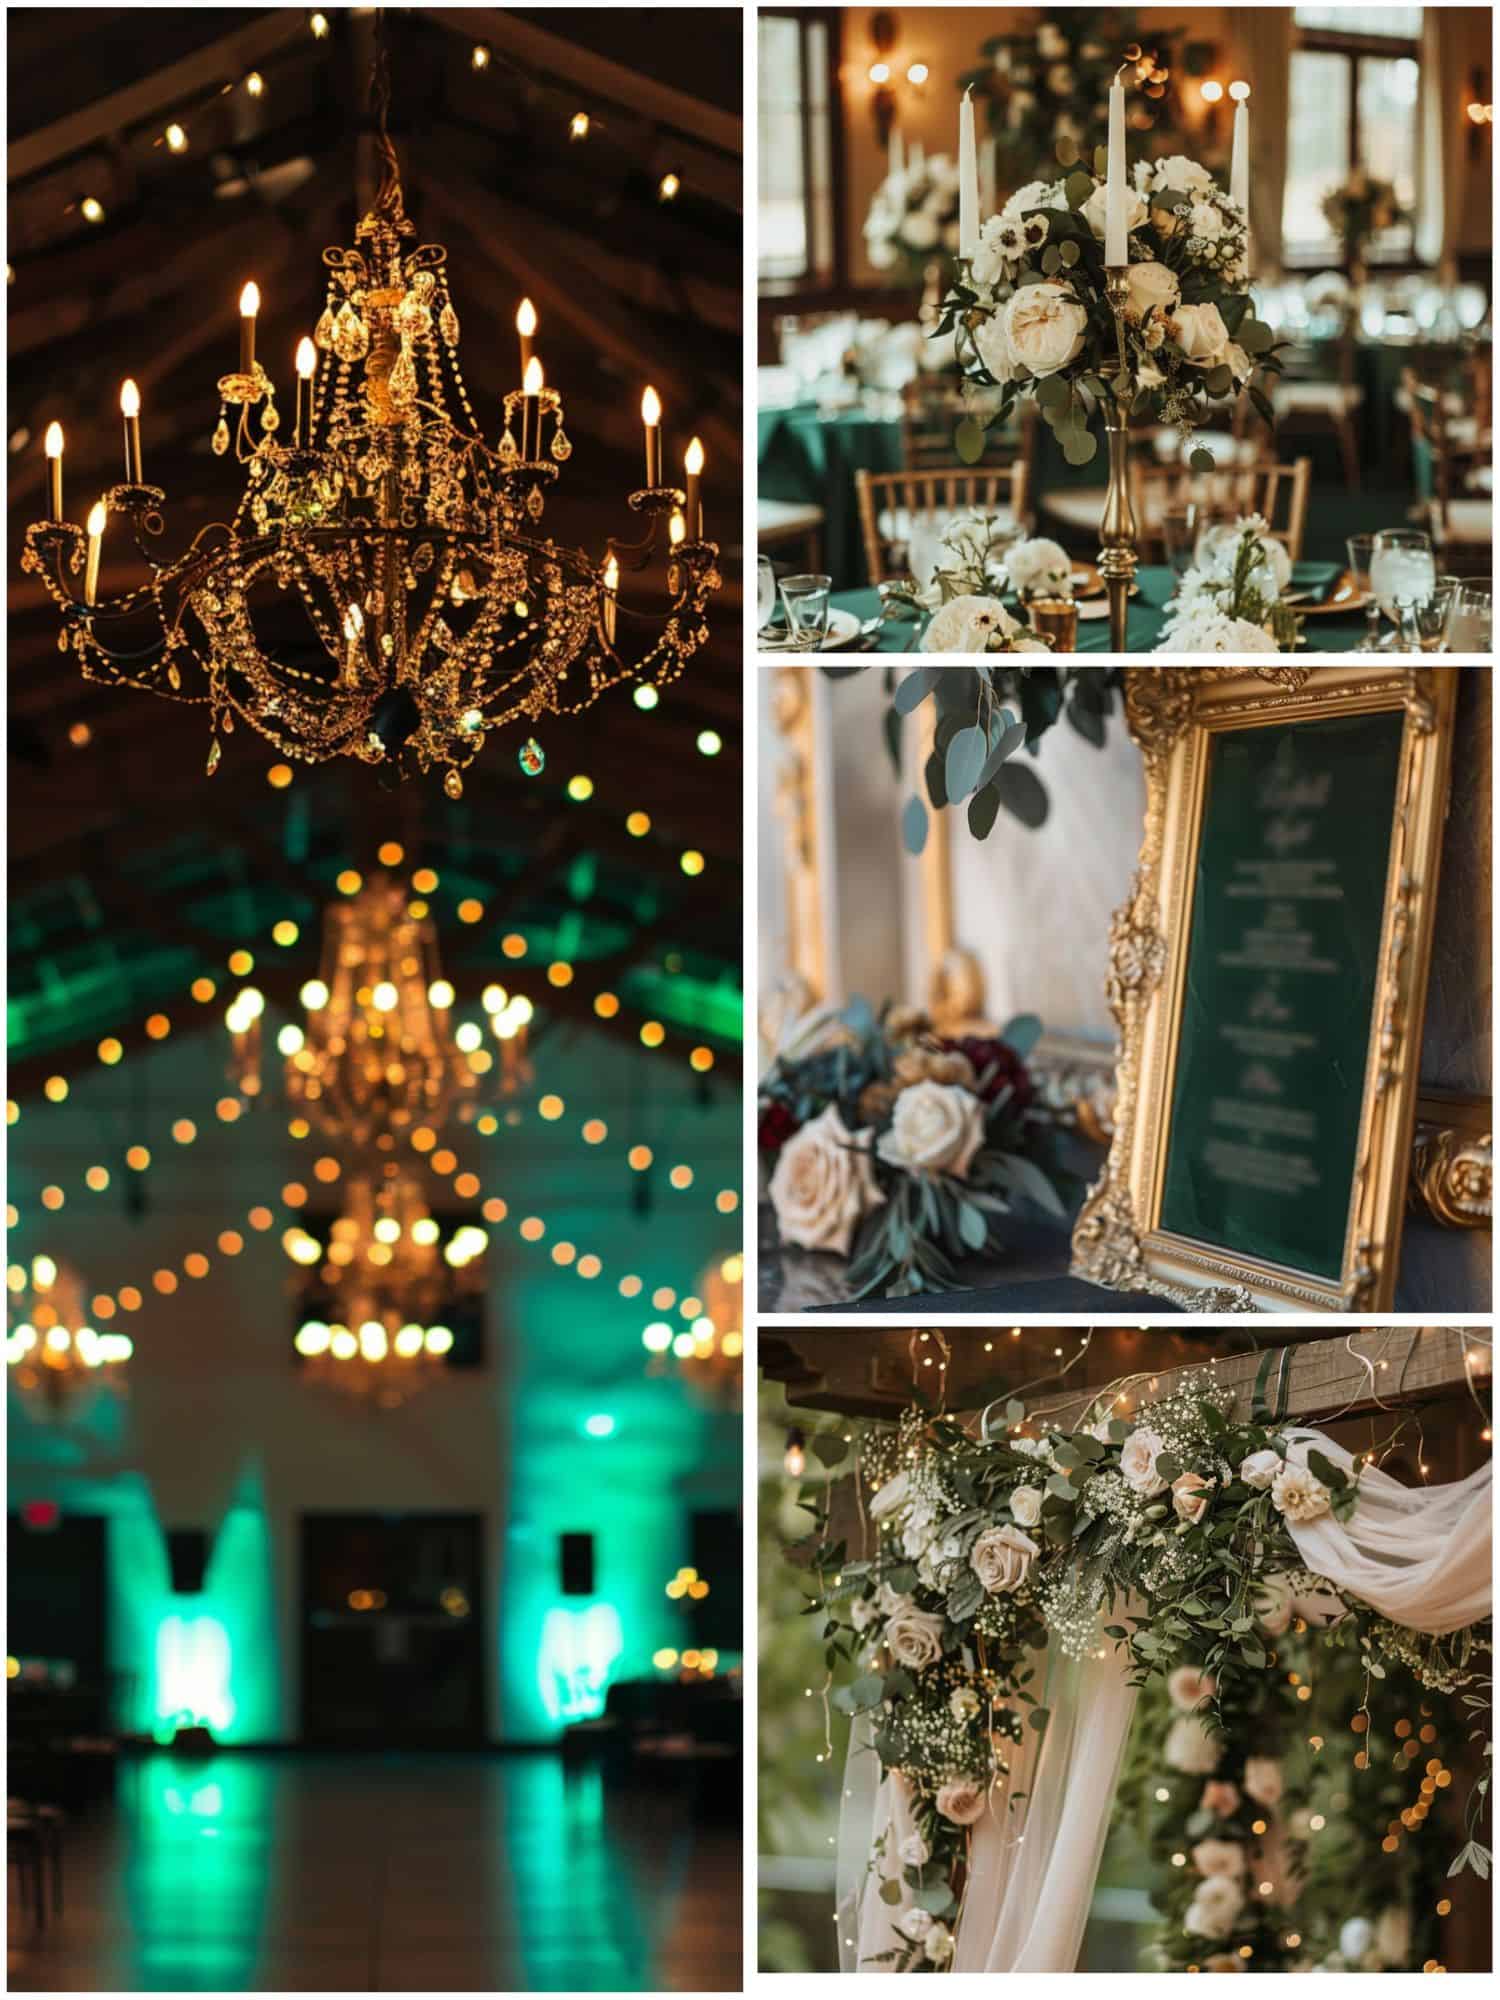 wedding decor in emerald green and gold